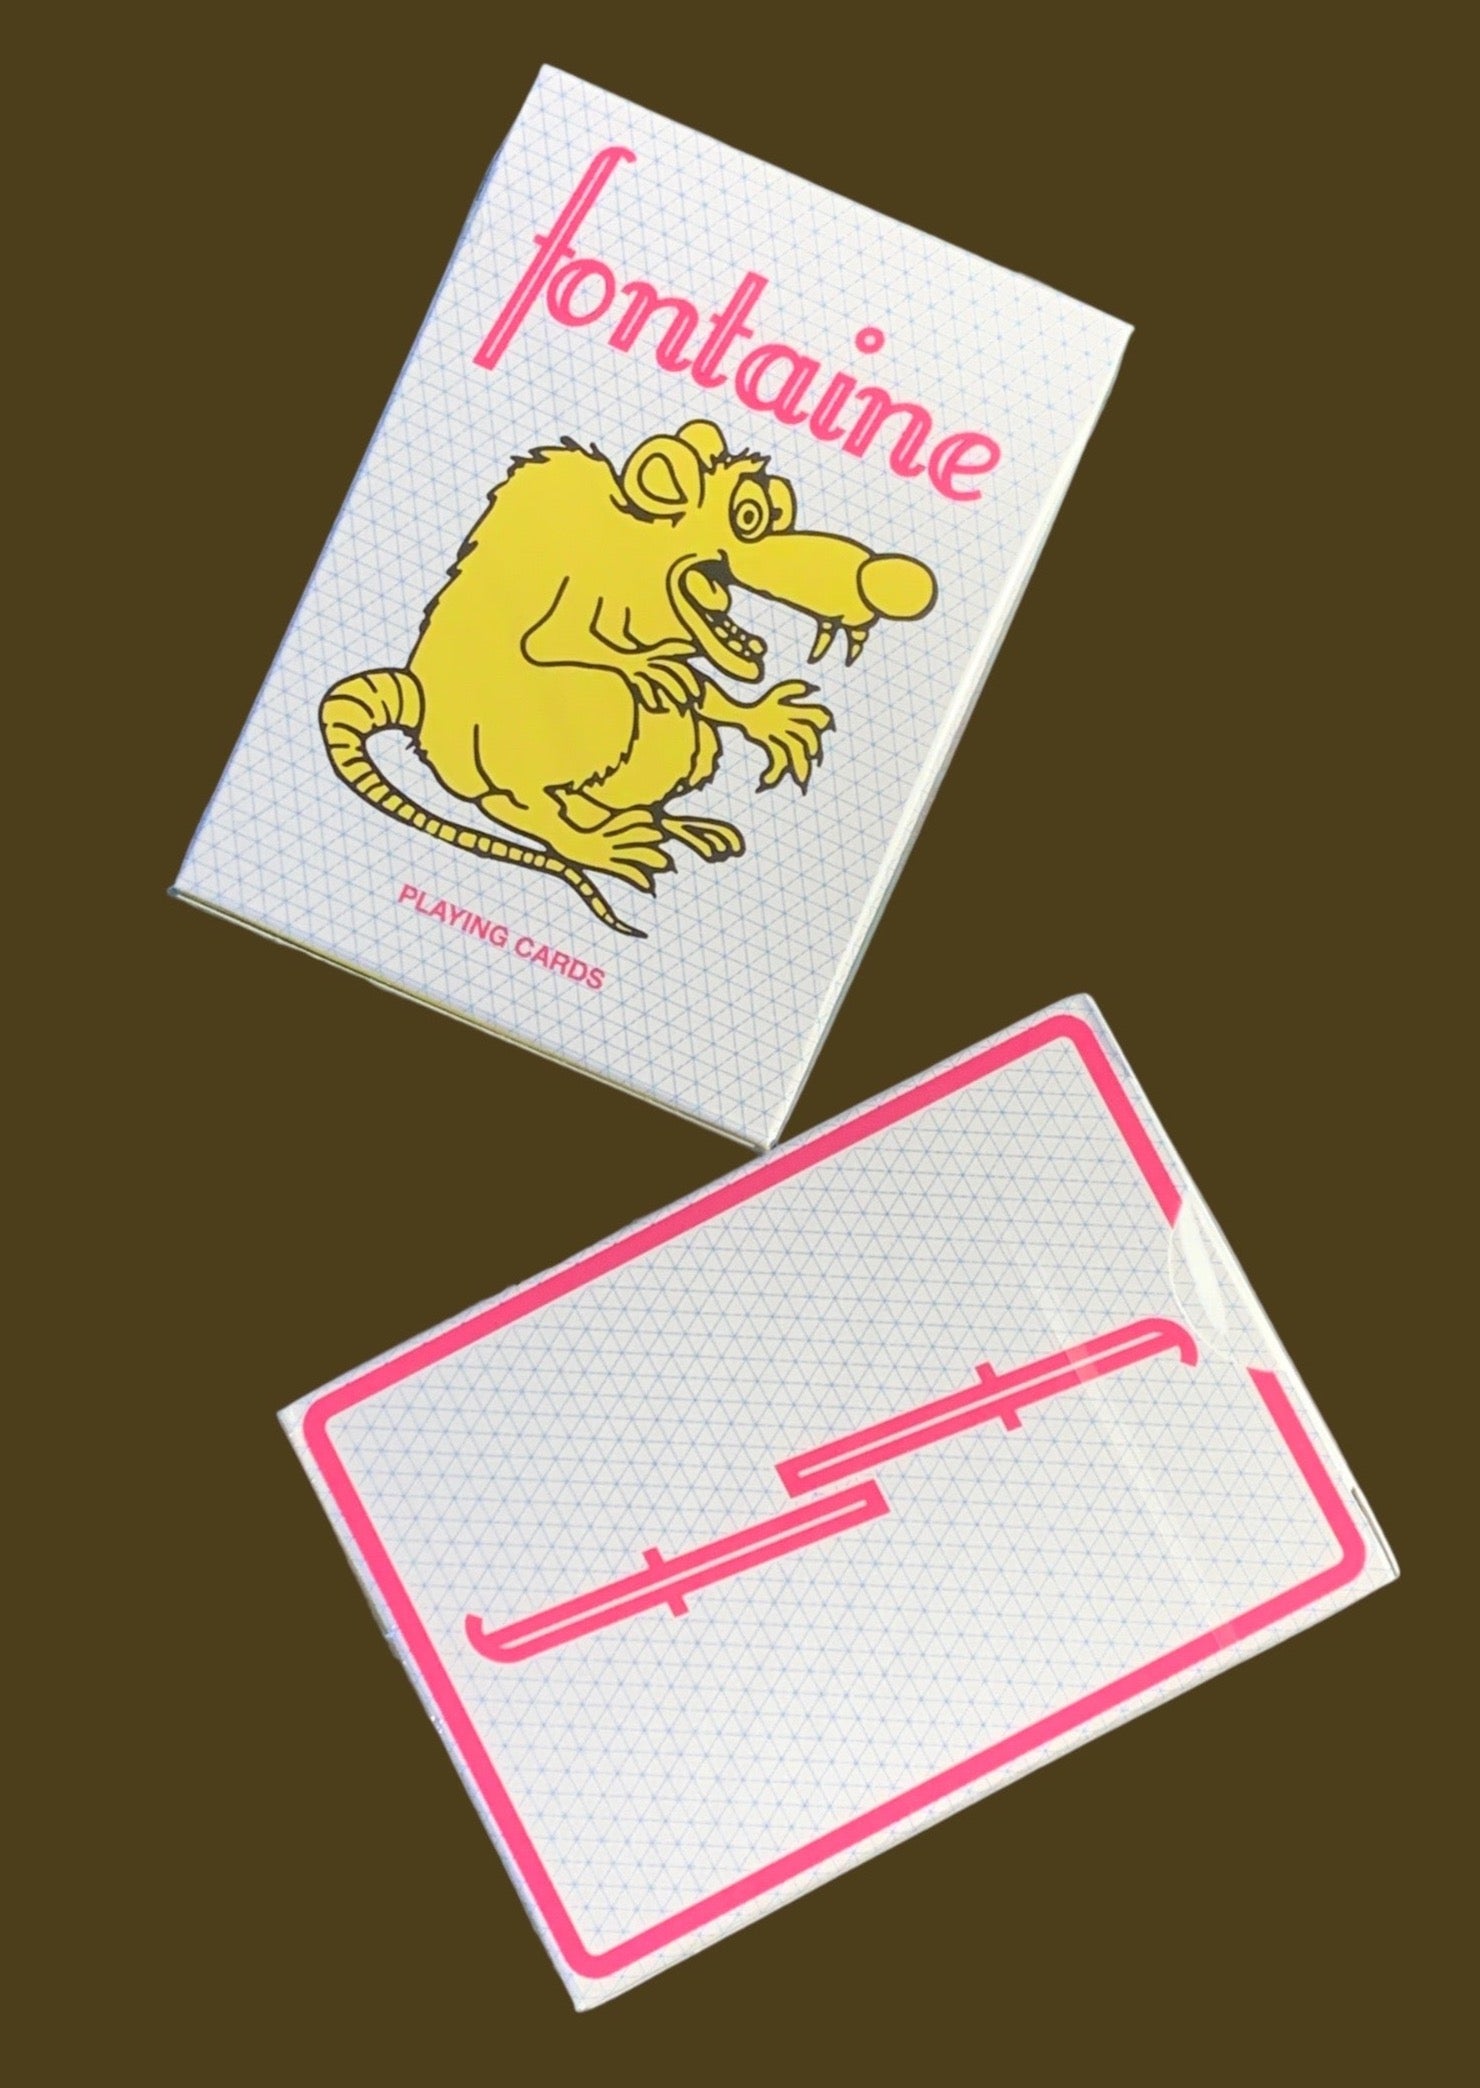 FONTAINE CRAZY RAT playing cards 5000s uk deck